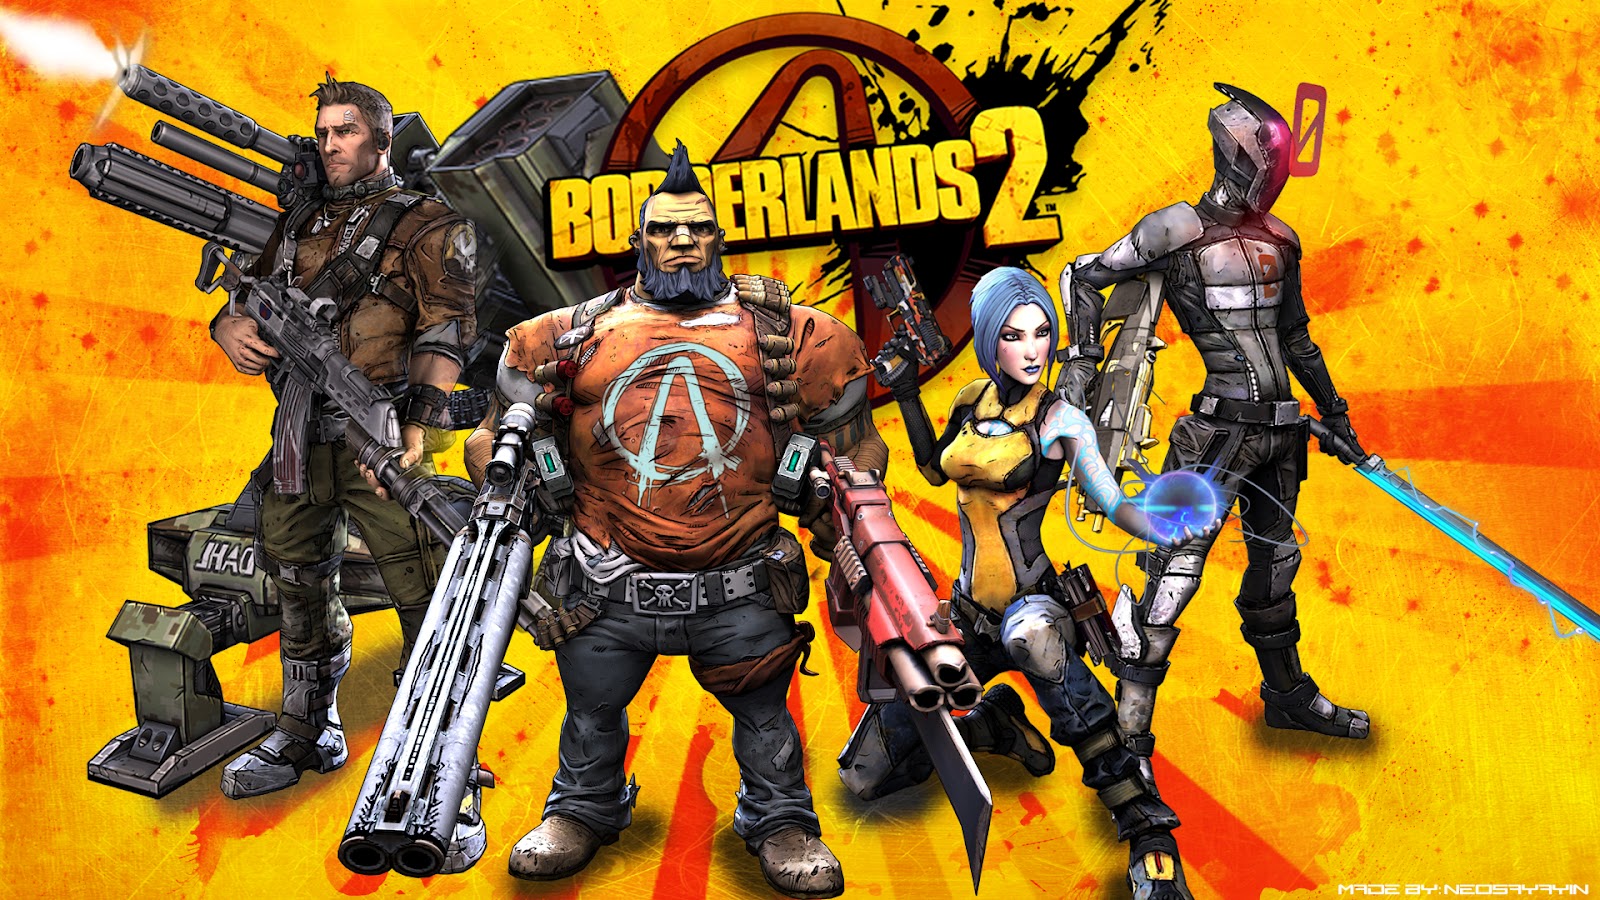 game wallpapers treeshd borderlands high definition wallpapers